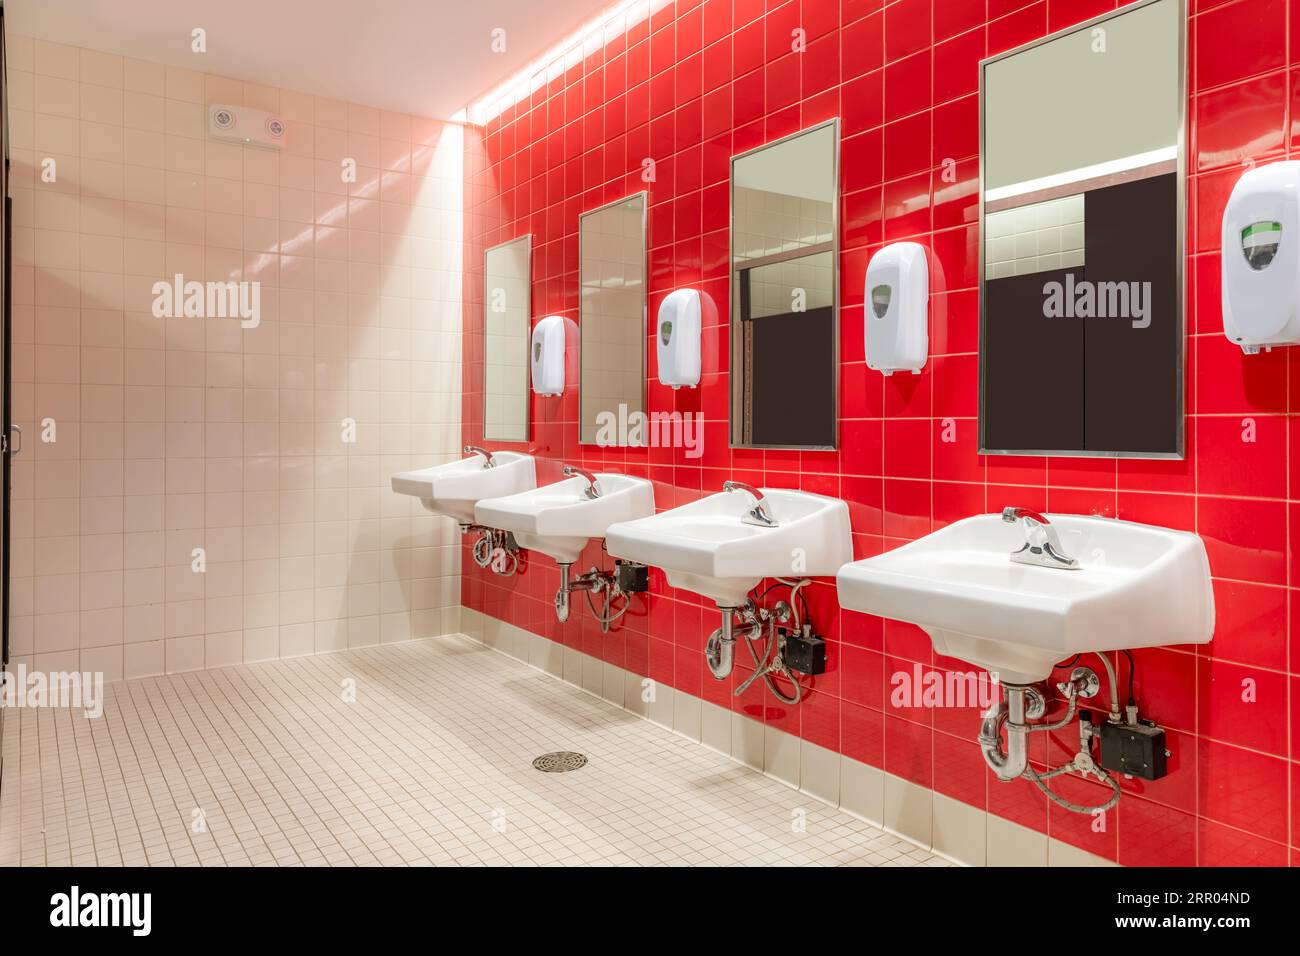 Public restroom with red tile and four, lavatories, sinks Stock Photo